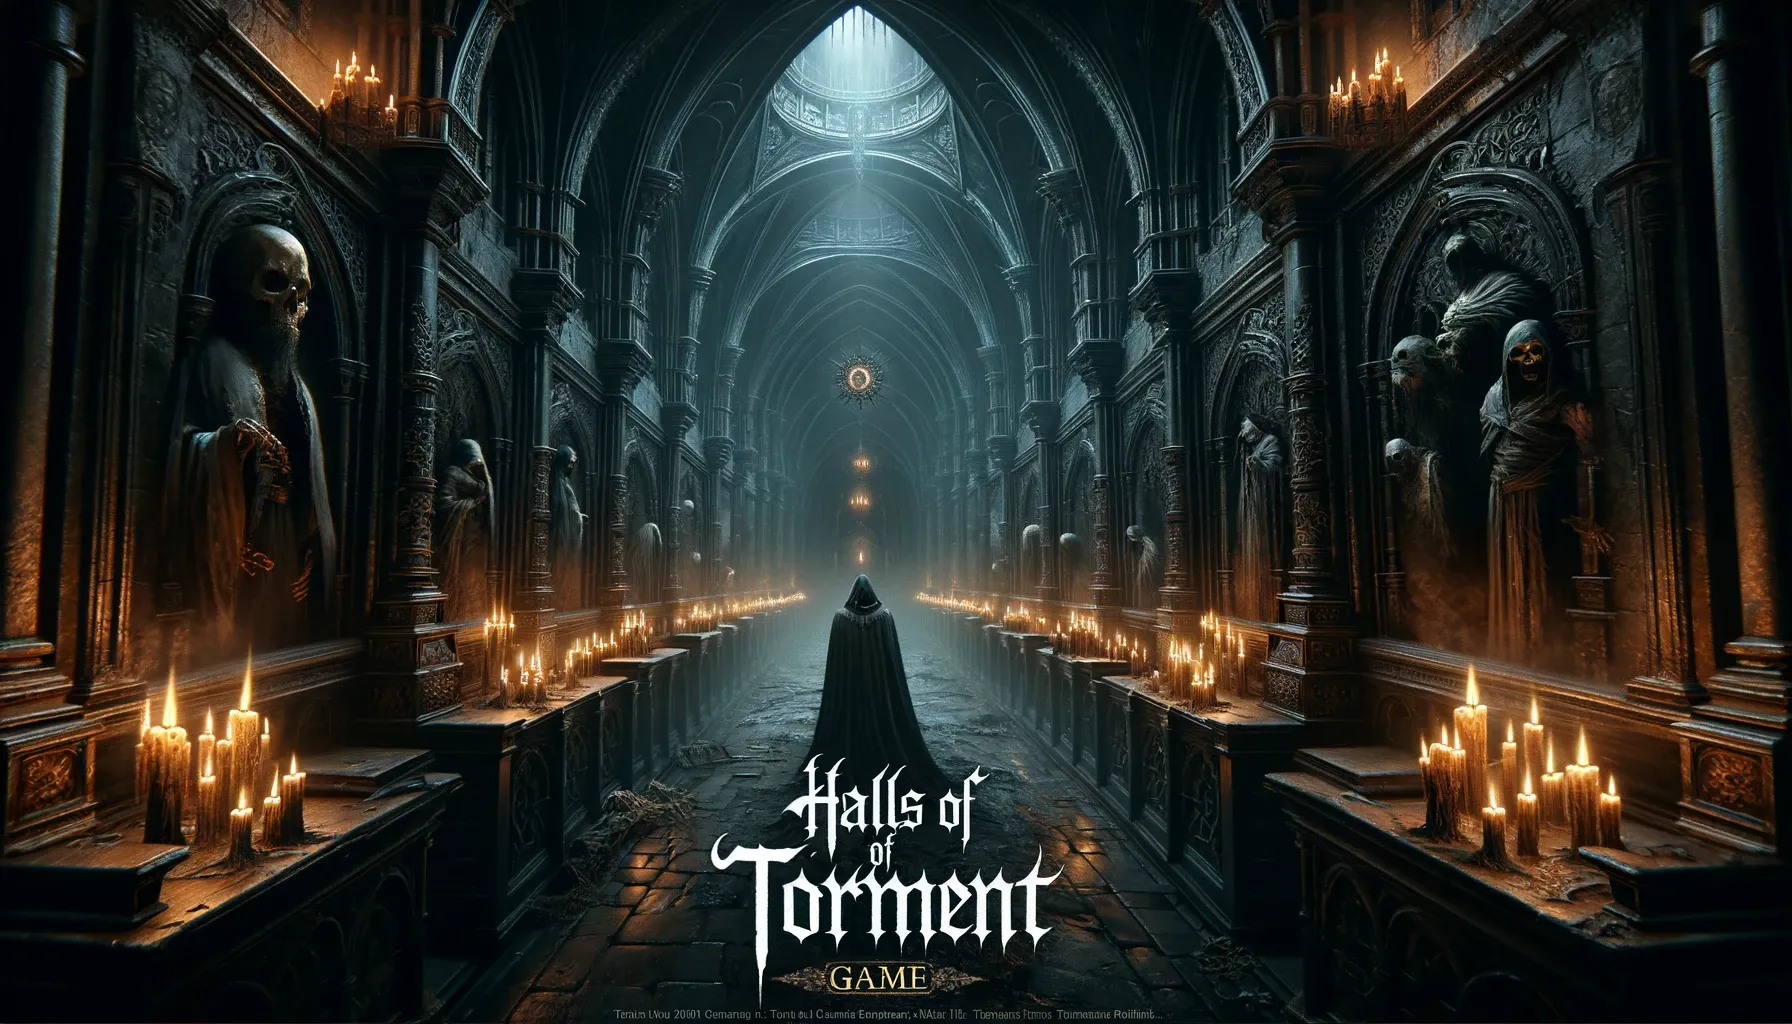 Hails of Torment Game: A Journey Through the Depths of Despair